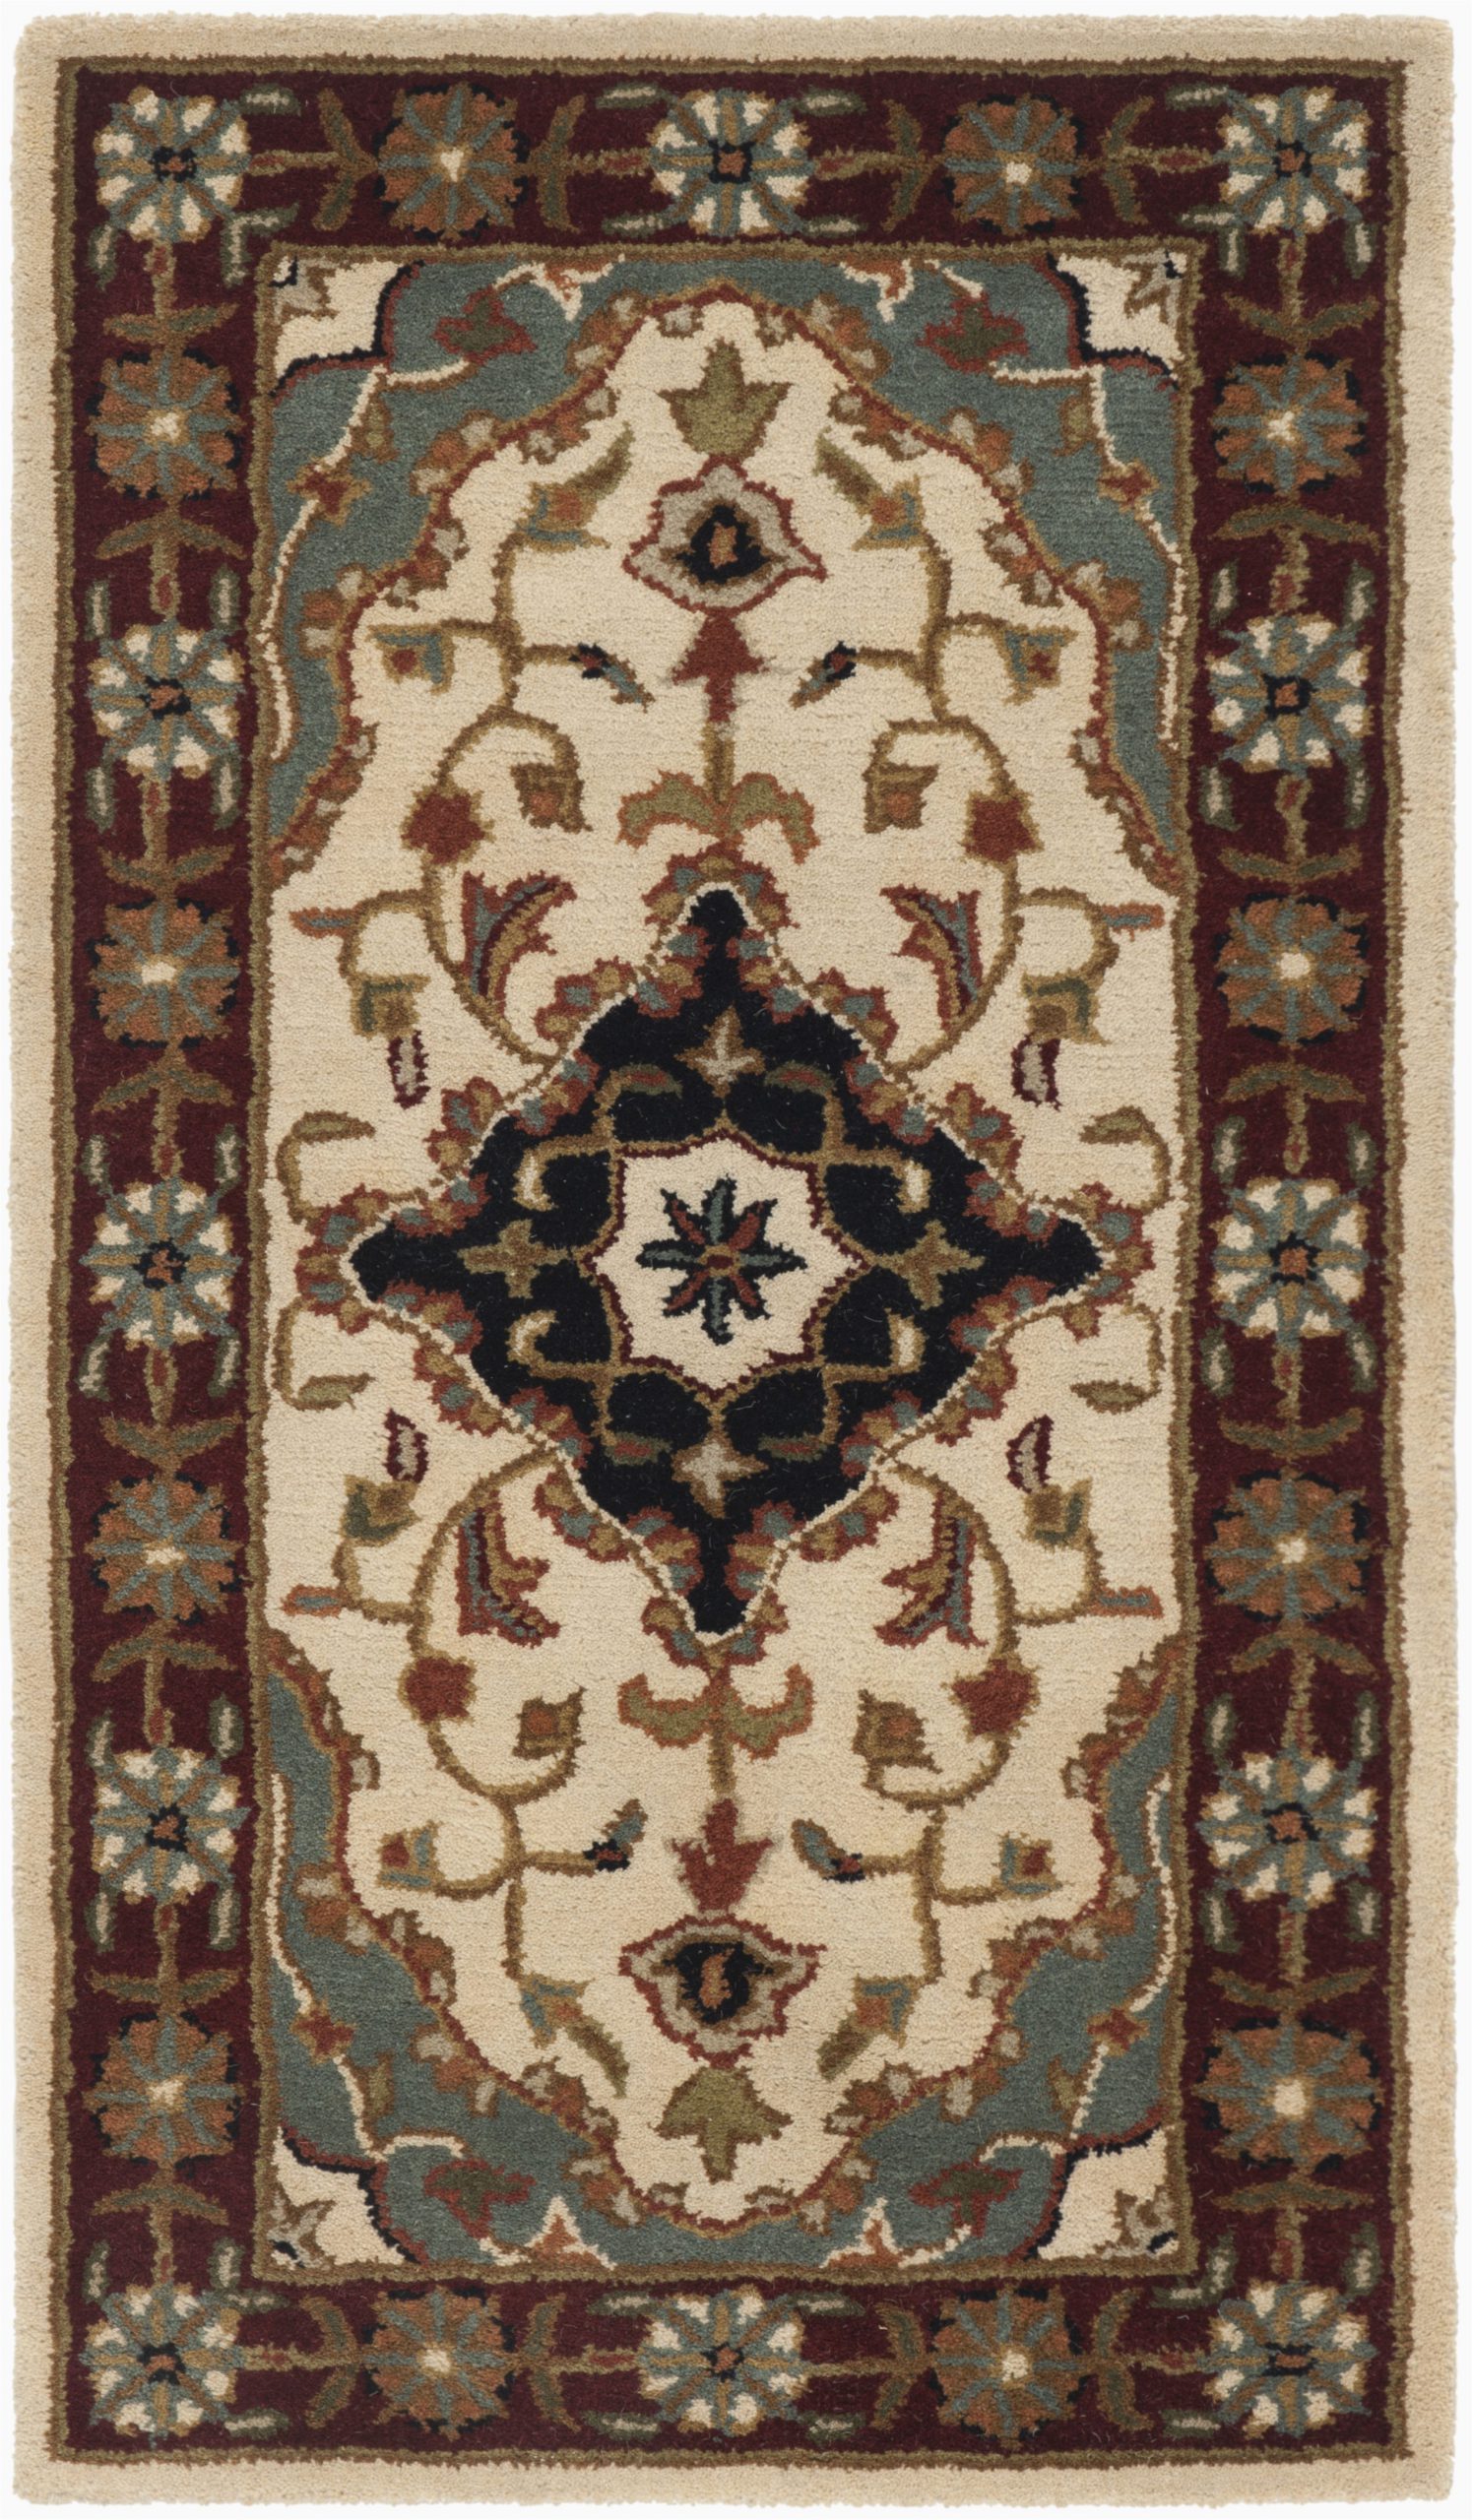 Lowes area Rugs On Clearance Safavieh Heritage Rug 2 3 X 4 Wool Ivory Red